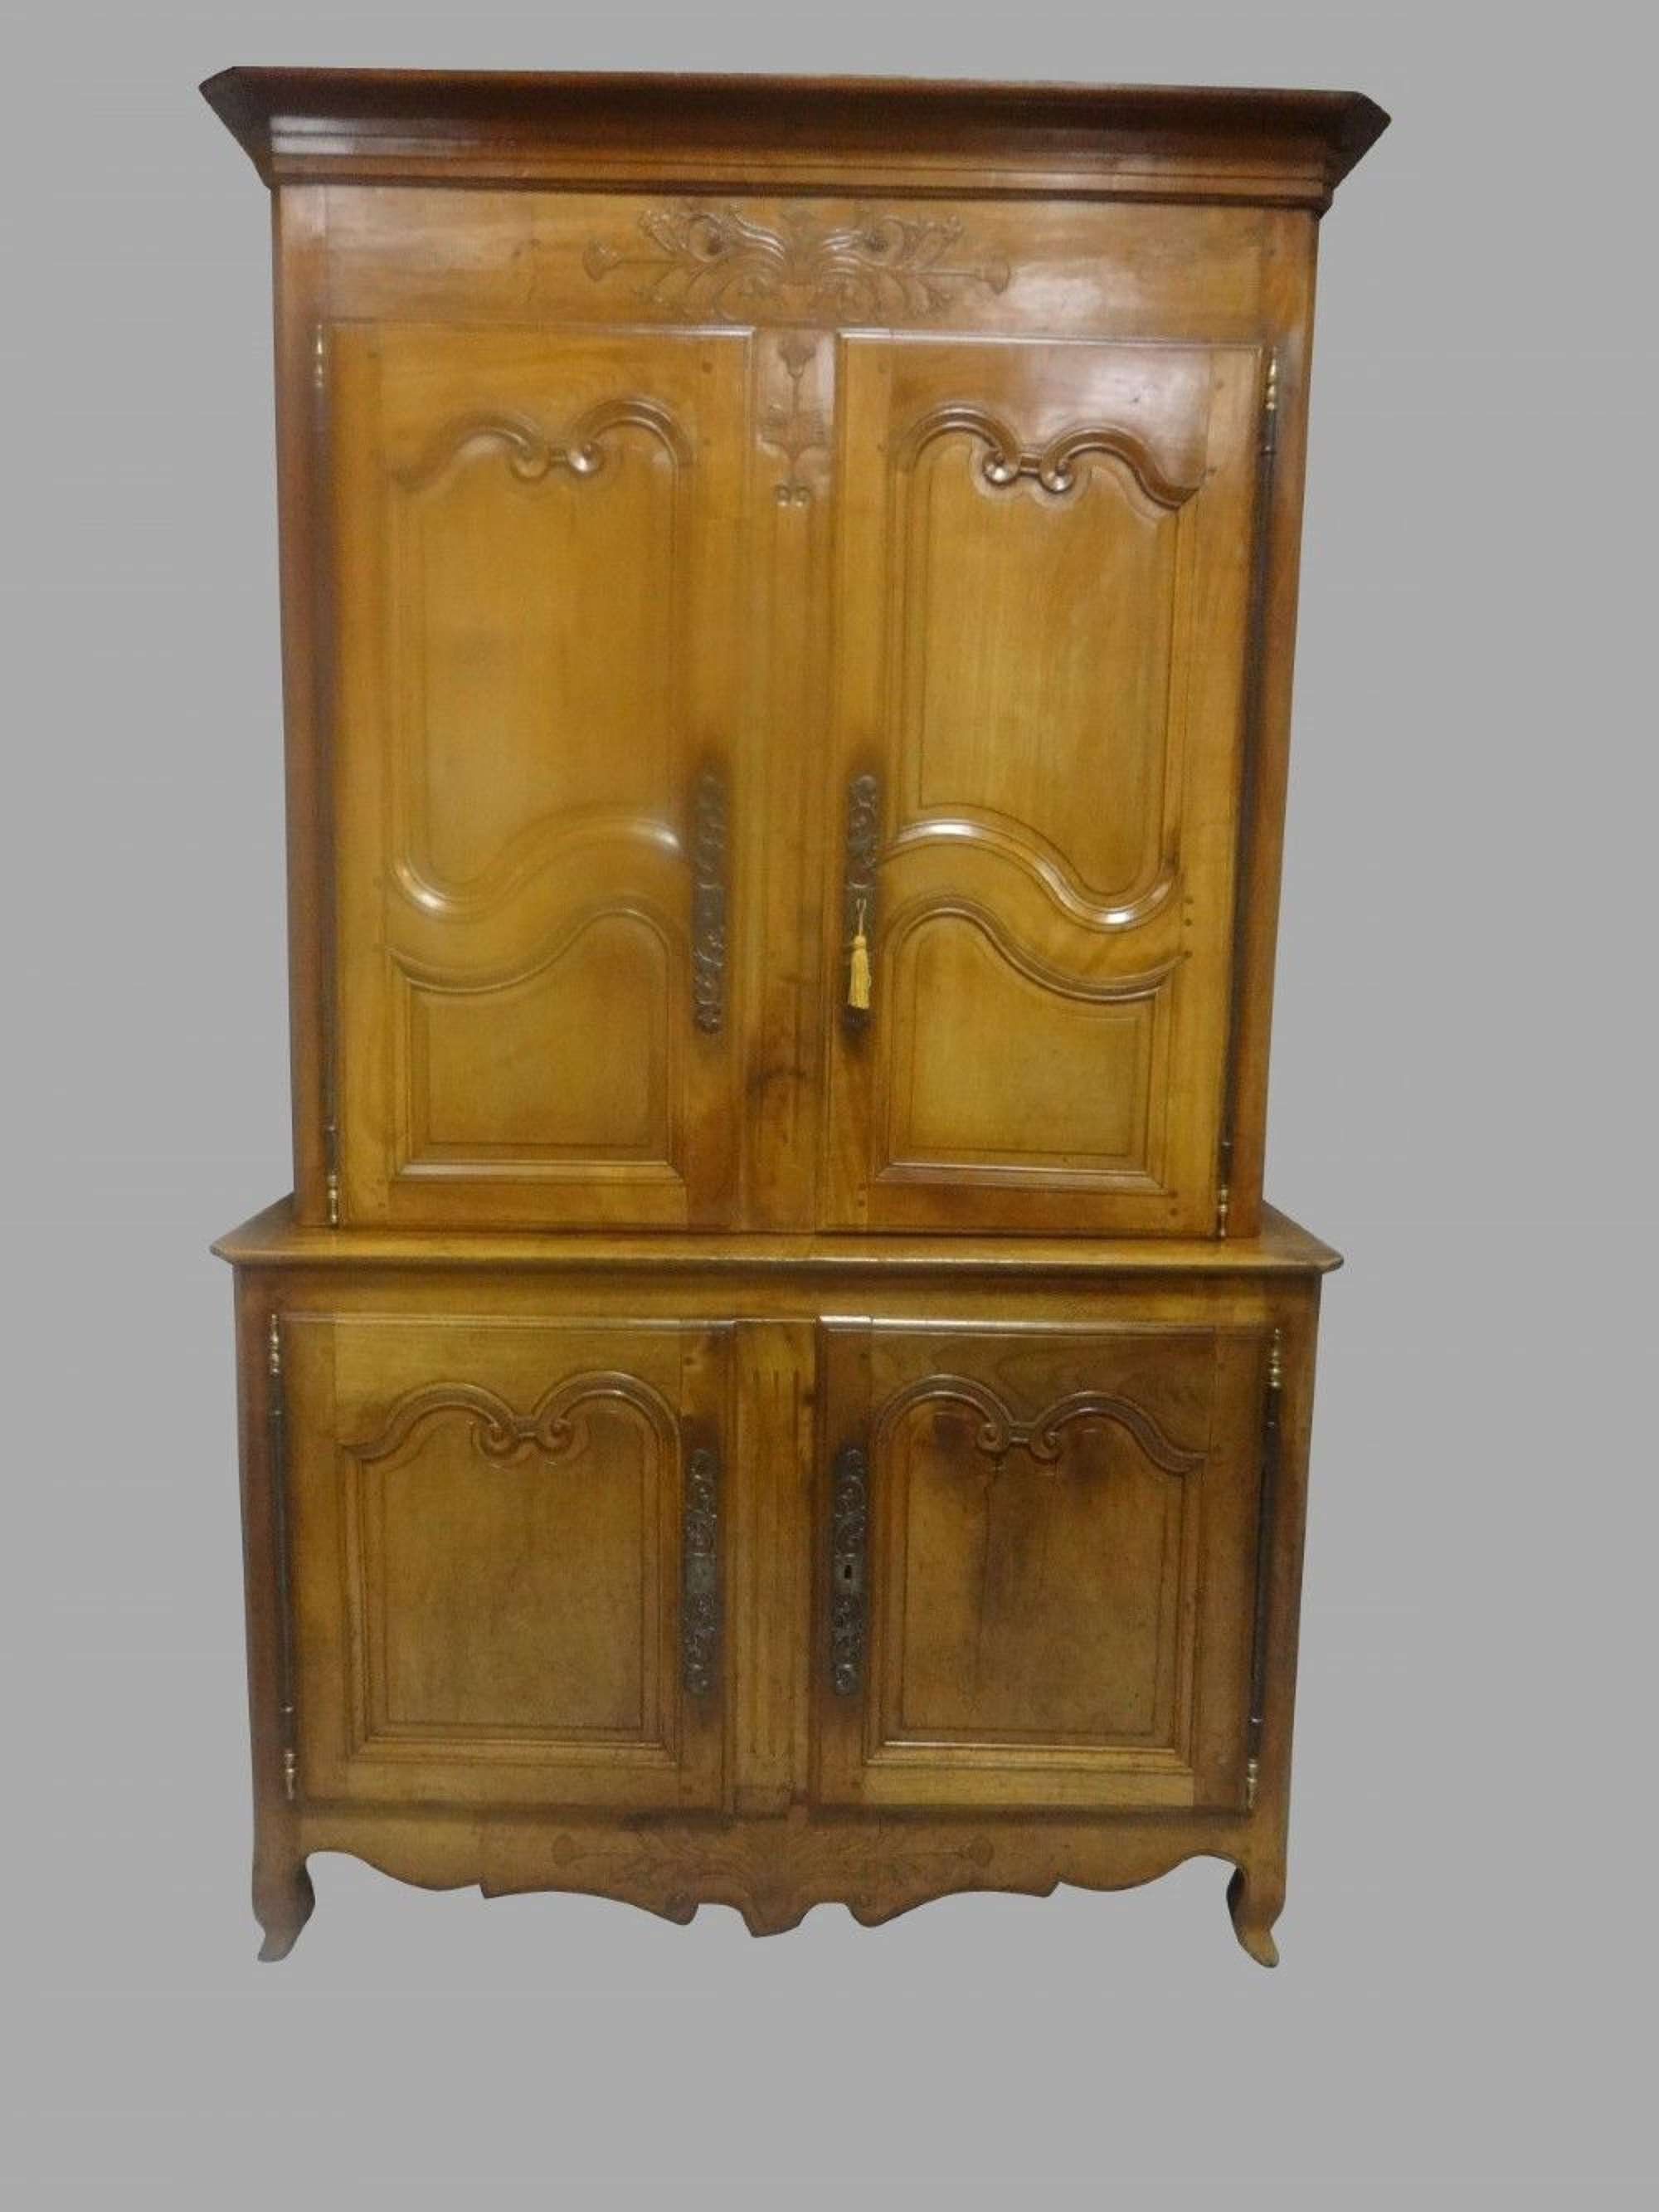 Fabulous French Provincial Fruitwood Cupboard